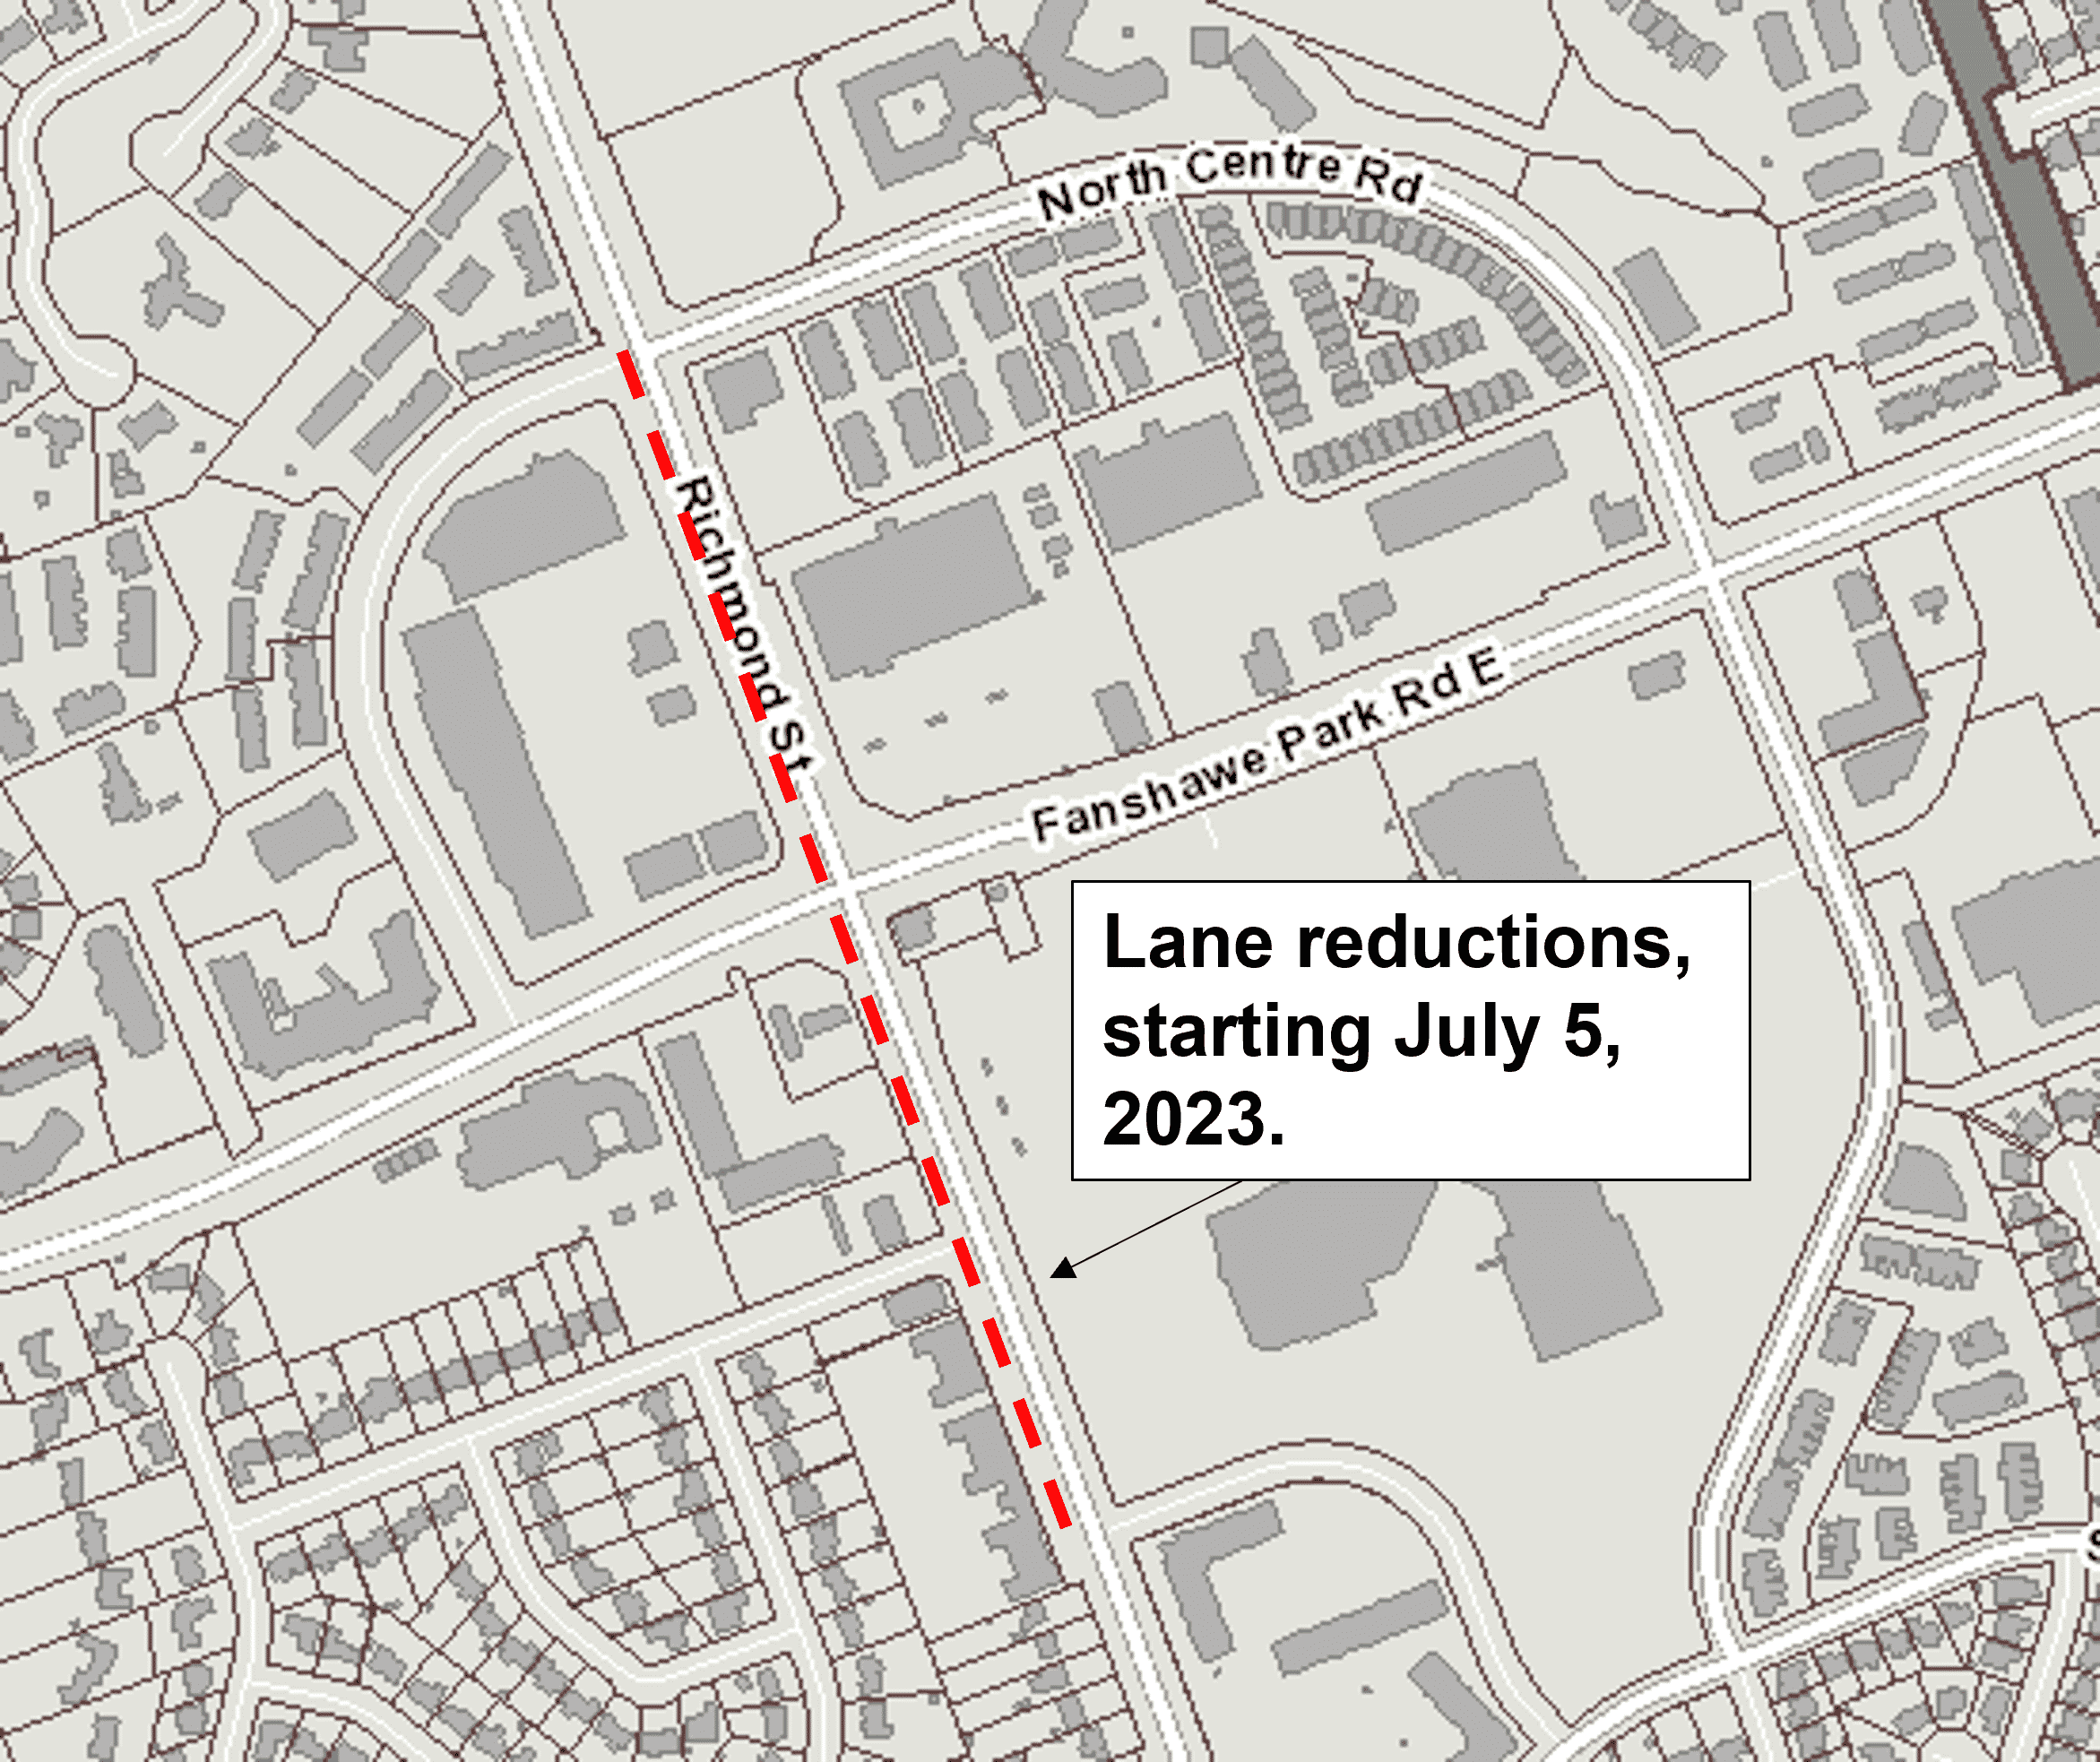 Map of the approximate lane reductions, starting July 5, 2023.